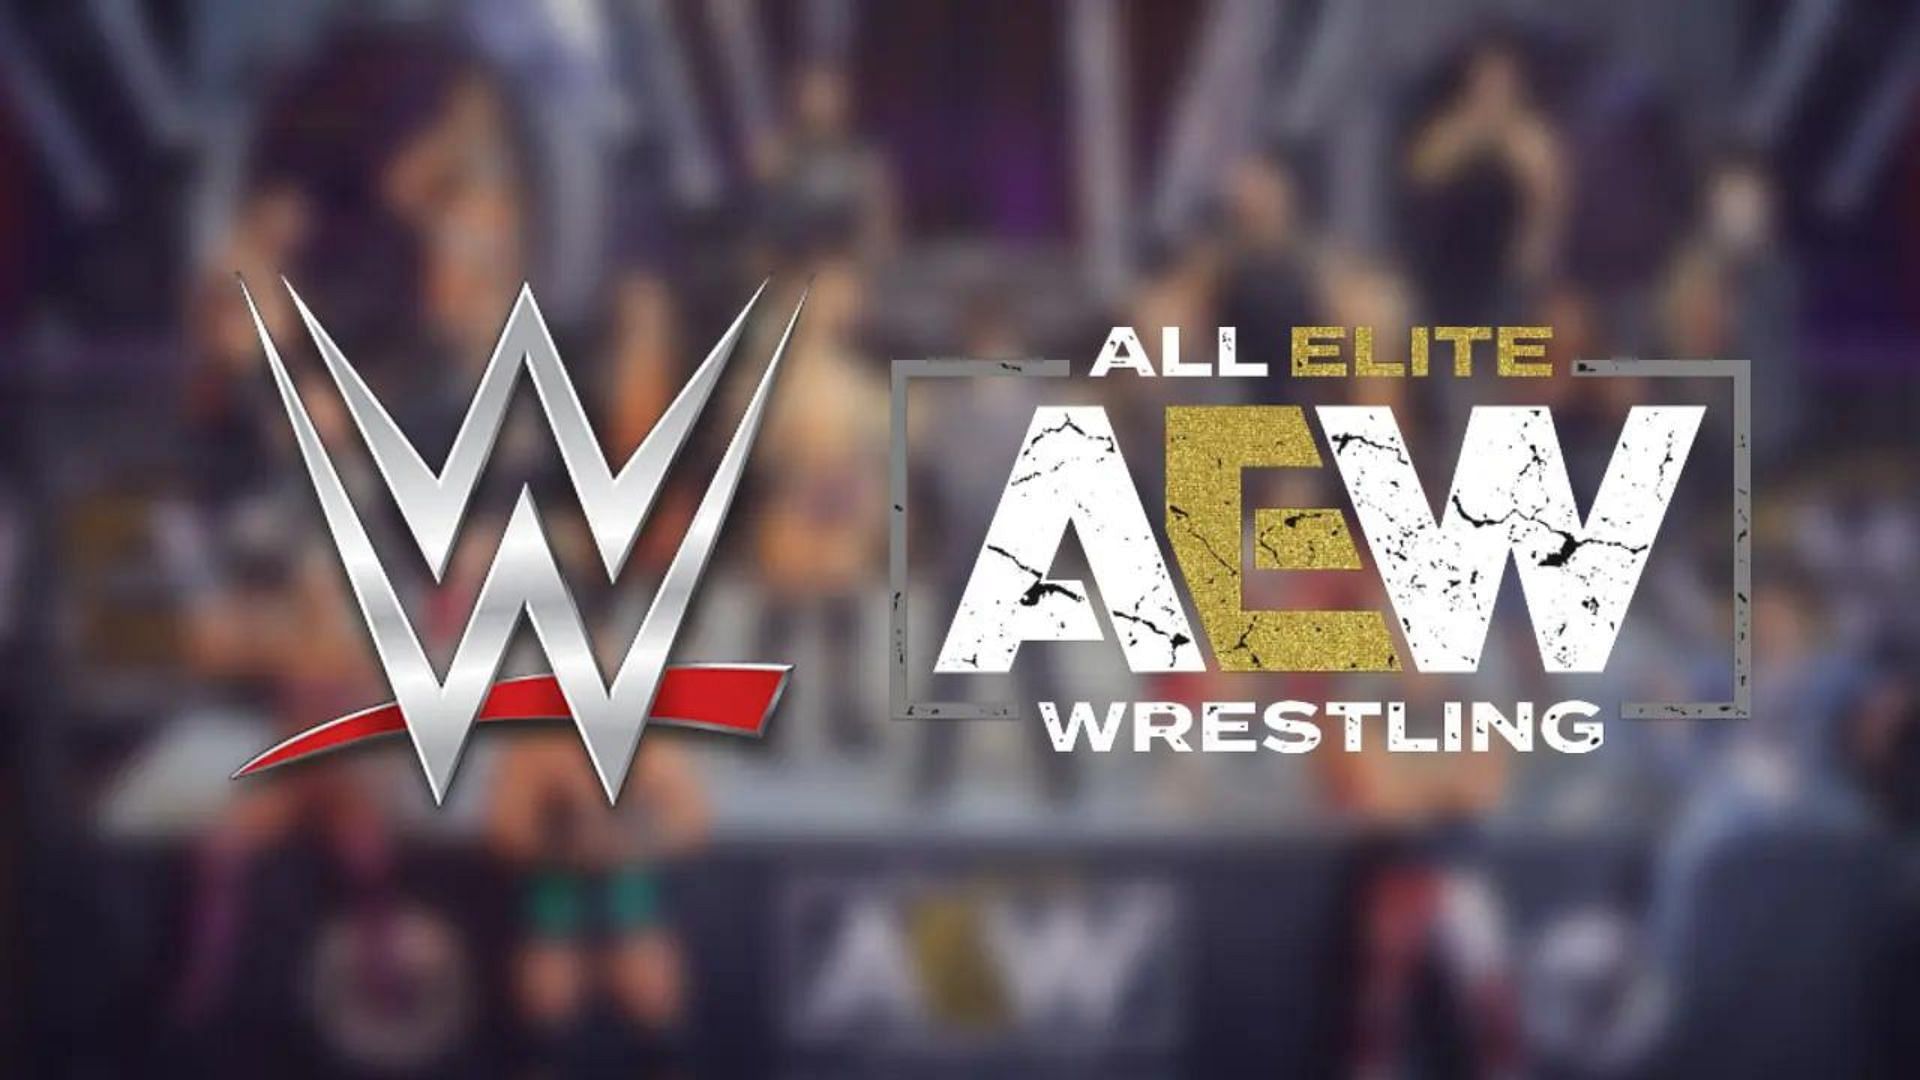 WWE and its rival wrestling promotion AEW.